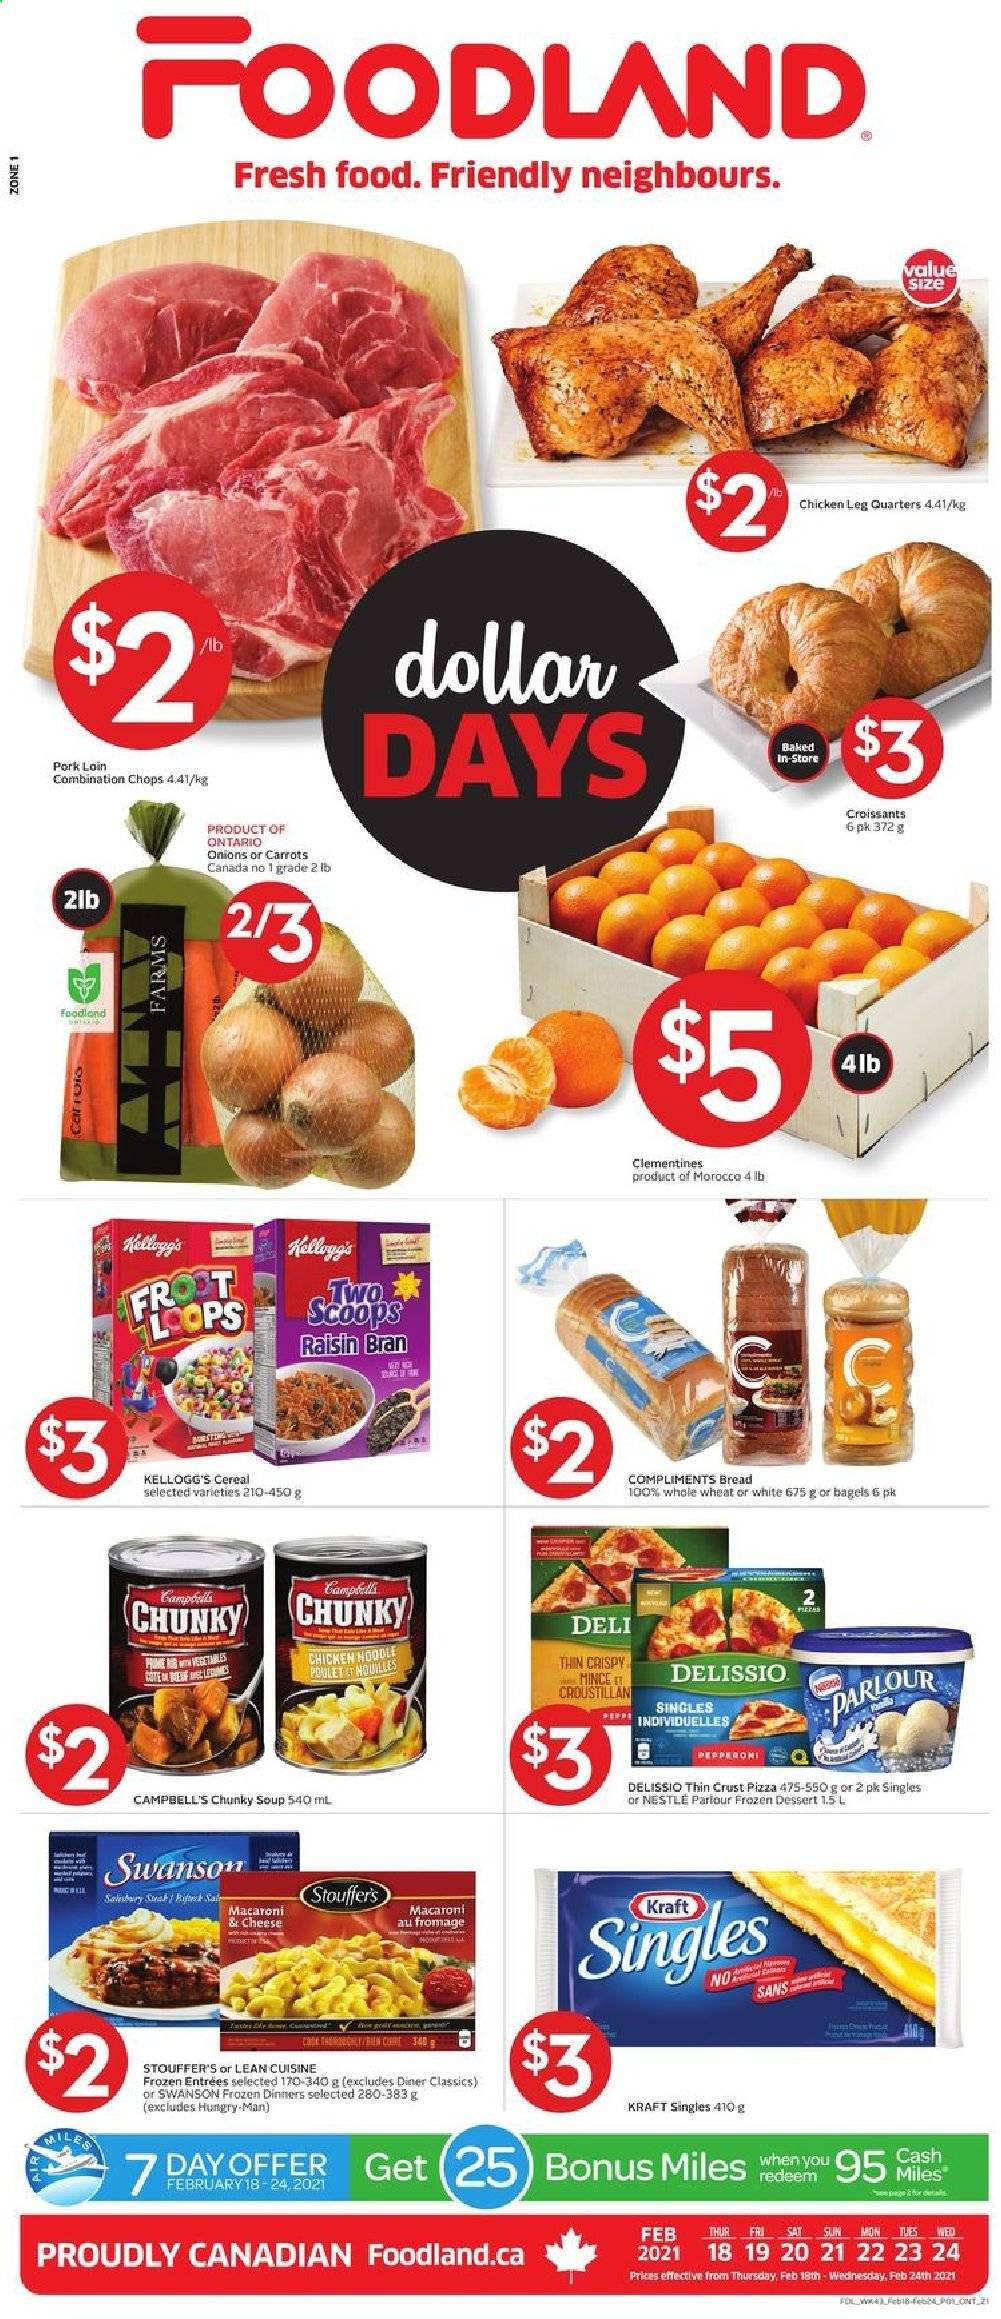 thumbnail - Foodland Flyer - February 18, 2021 - February 24, 2021 - Sales products - bagels, bread, croissant, carrots, clementines, Campbell's, macaroni & cheese, pizza, soup, noodles, Lean Cuisine, Kraft®, sandwich slices, Kraft Singles, Stouffer's, Kellogg's, cereals, Raisin Bran, chicken legs, pork loin, pork meat, Nestlé. Page 1.